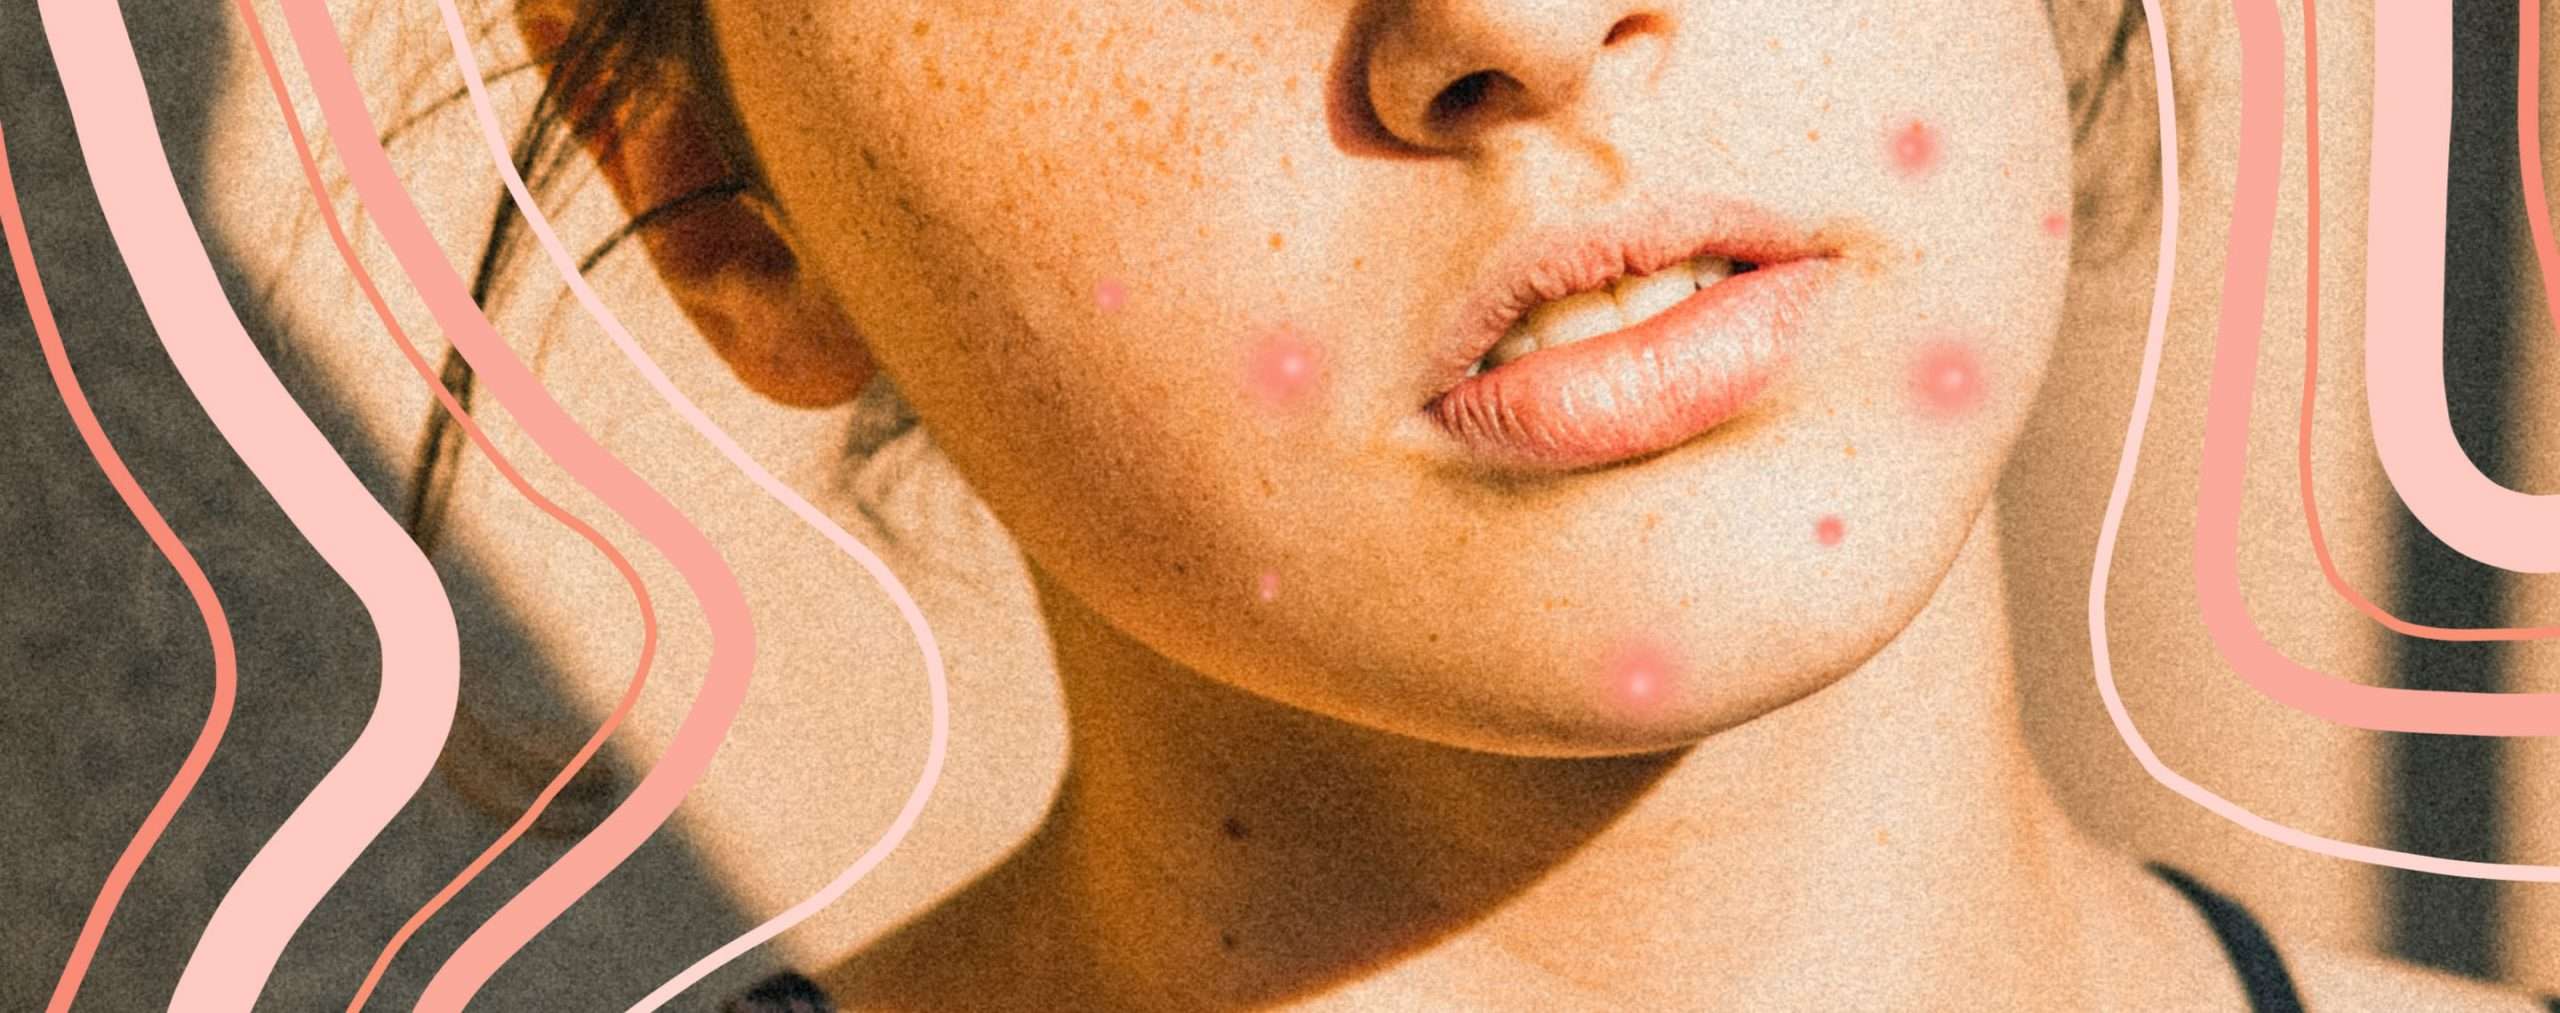 What is Hormonal Acne and How Do You Treat It?